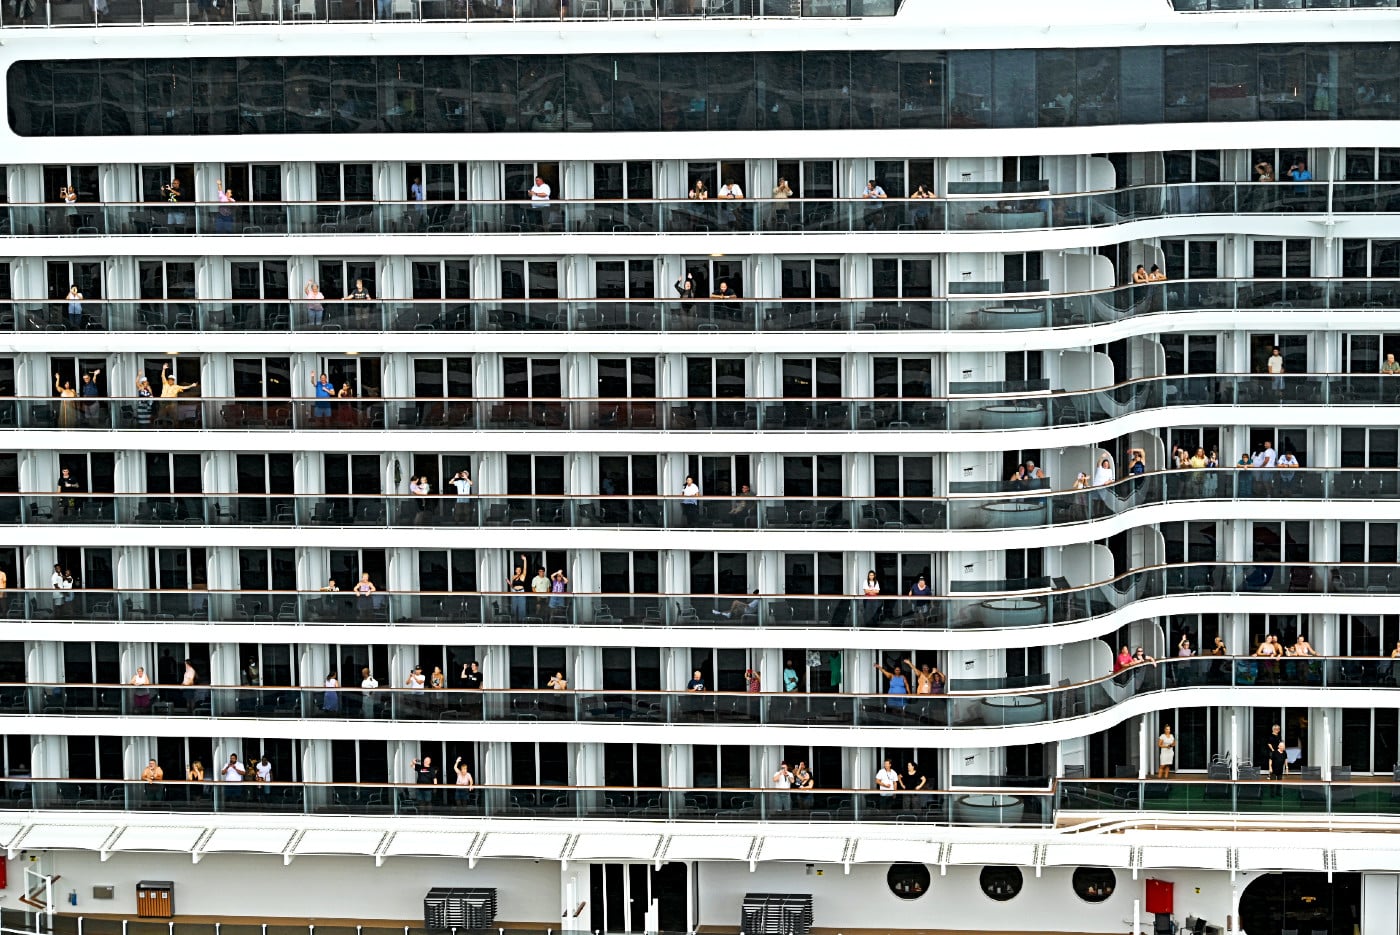 balcony staterooms on side of cruise ship, MSC